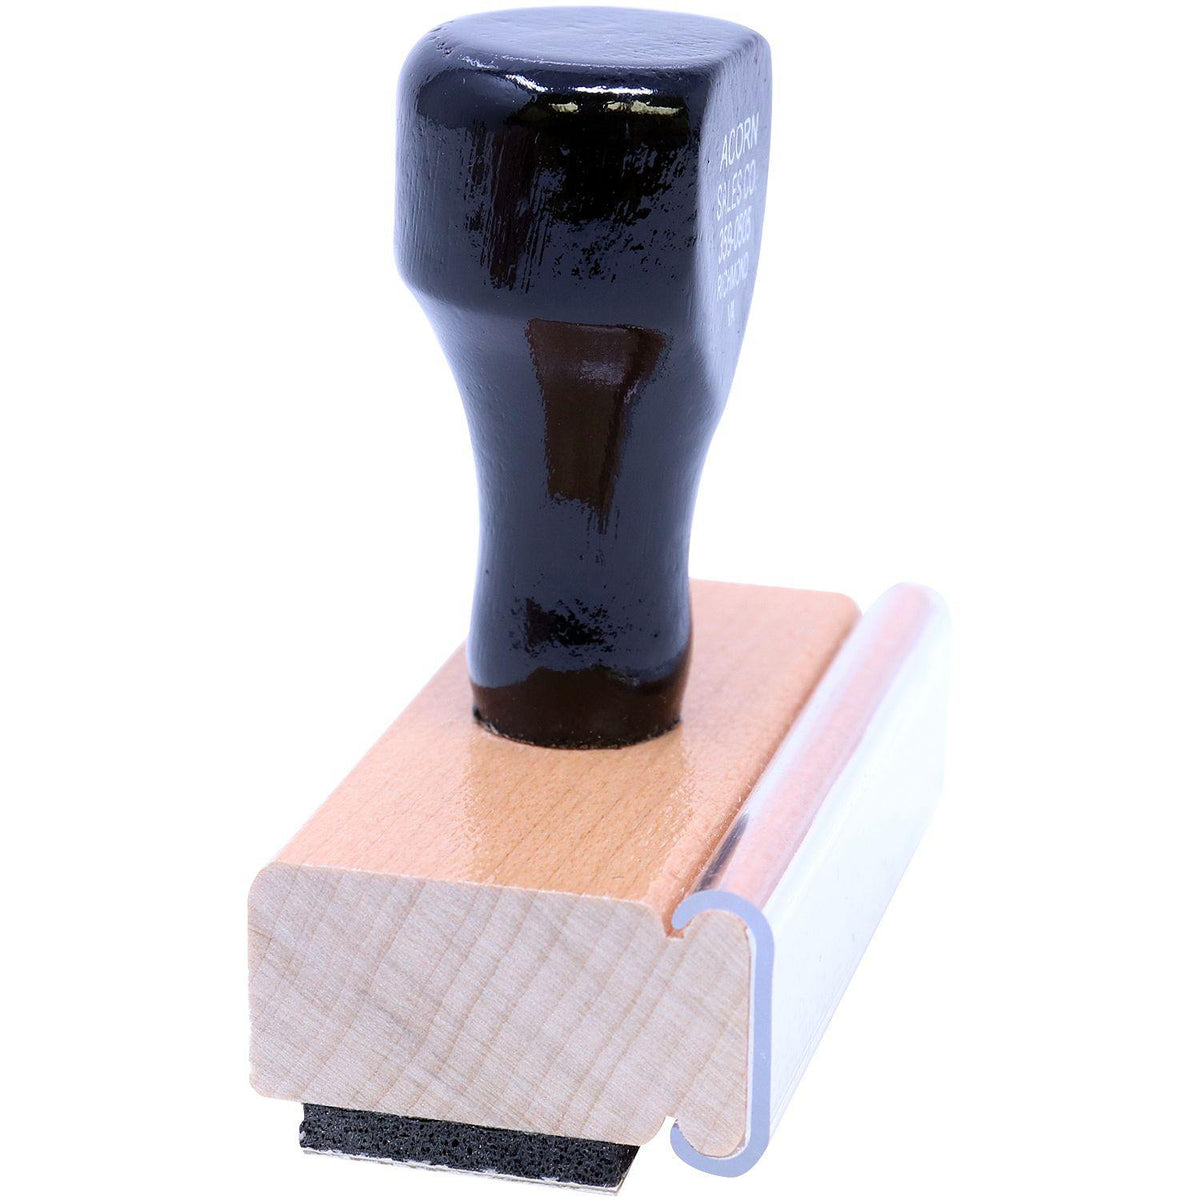 Side View of Large Magical Work Rubber Stamp at an Angle